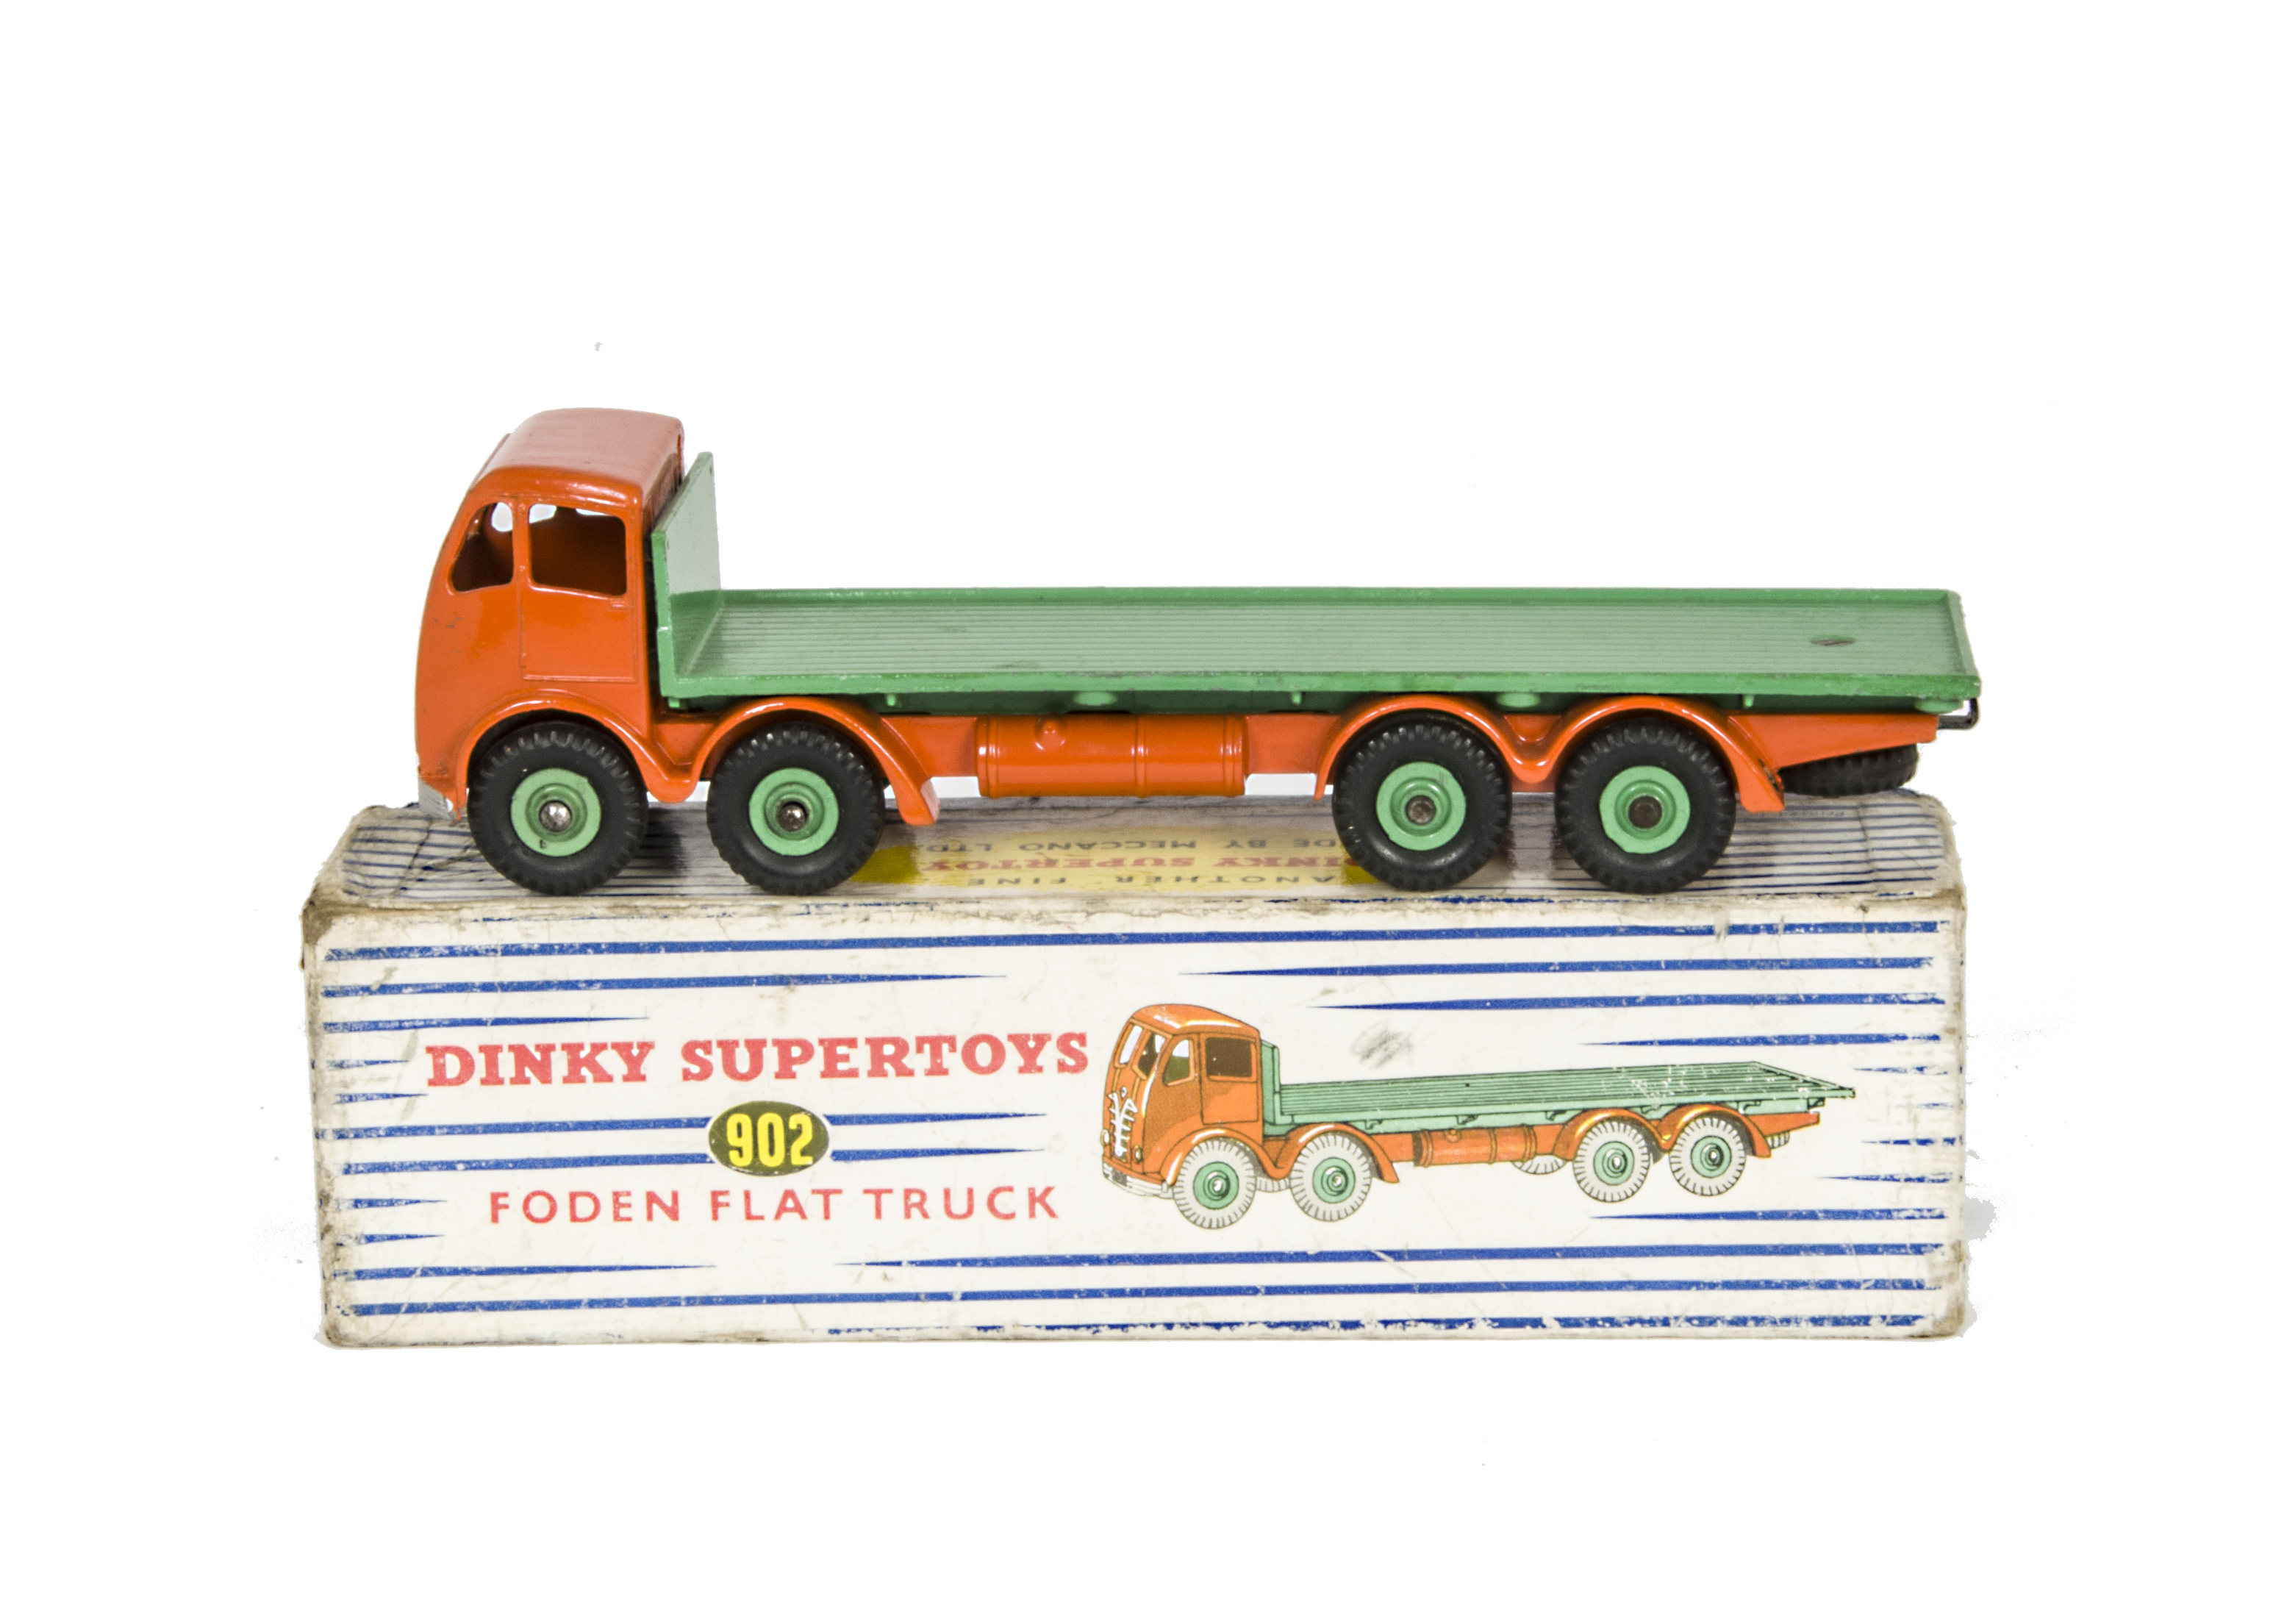 A Dinky Supertoys 902 Foden Flat Truck, 2nd type orange cab and chassis, mid-green flatbed and